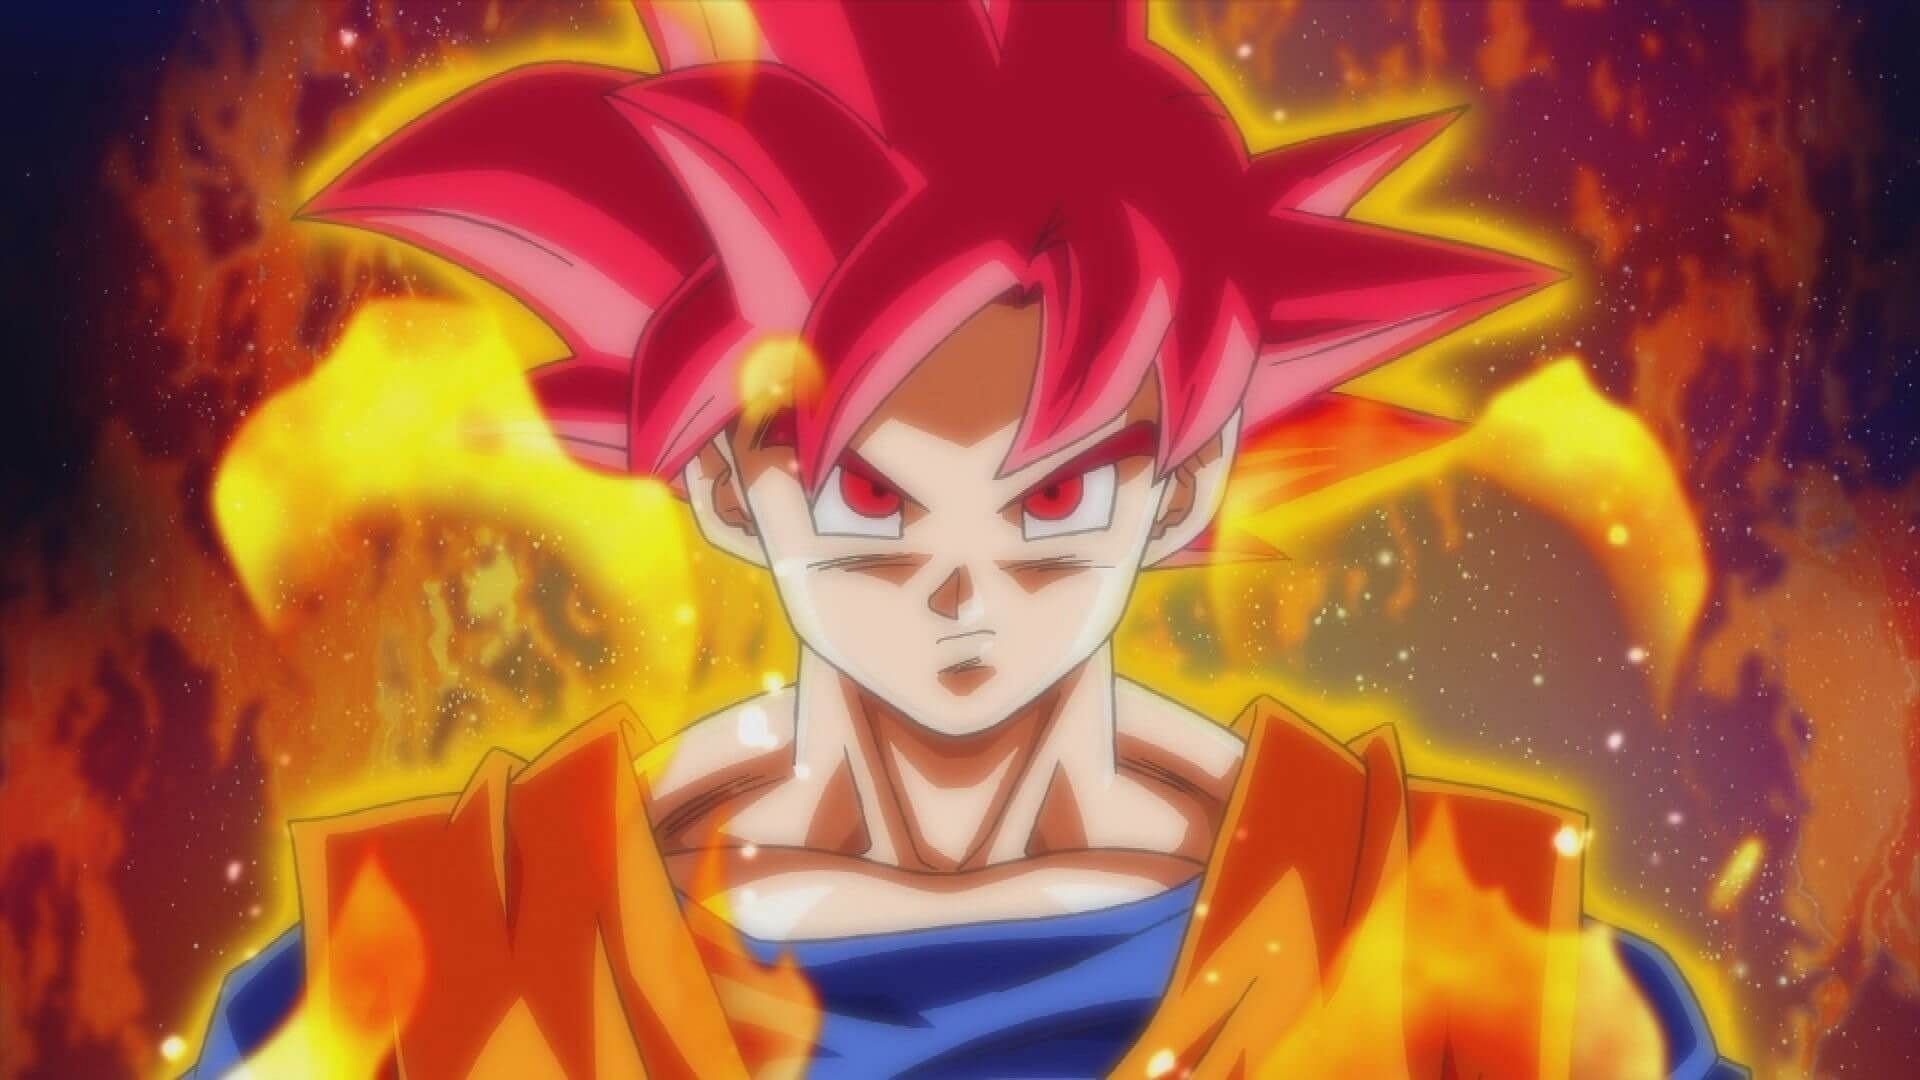 Goku in his base Super Saiyan God form: Although foundational for his growth throughout Super, SSG is not what is Goku's strongest form as of 2021 (Image via Toei Animation)